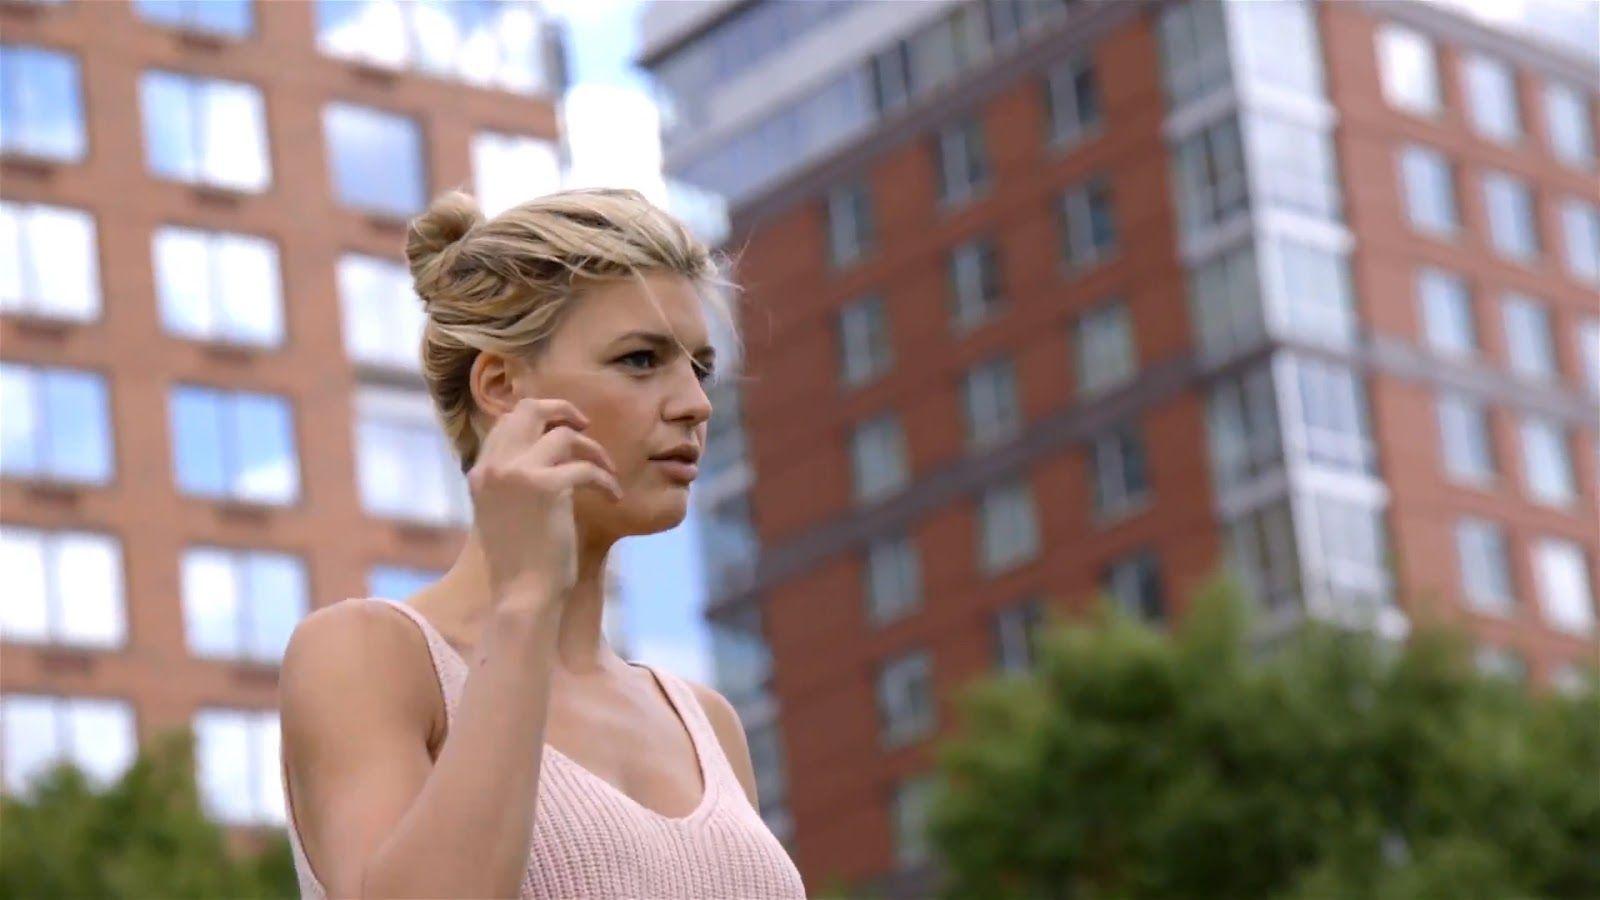 Kelly Rohrbach HD Picture Image Photo and Wallpaper Free